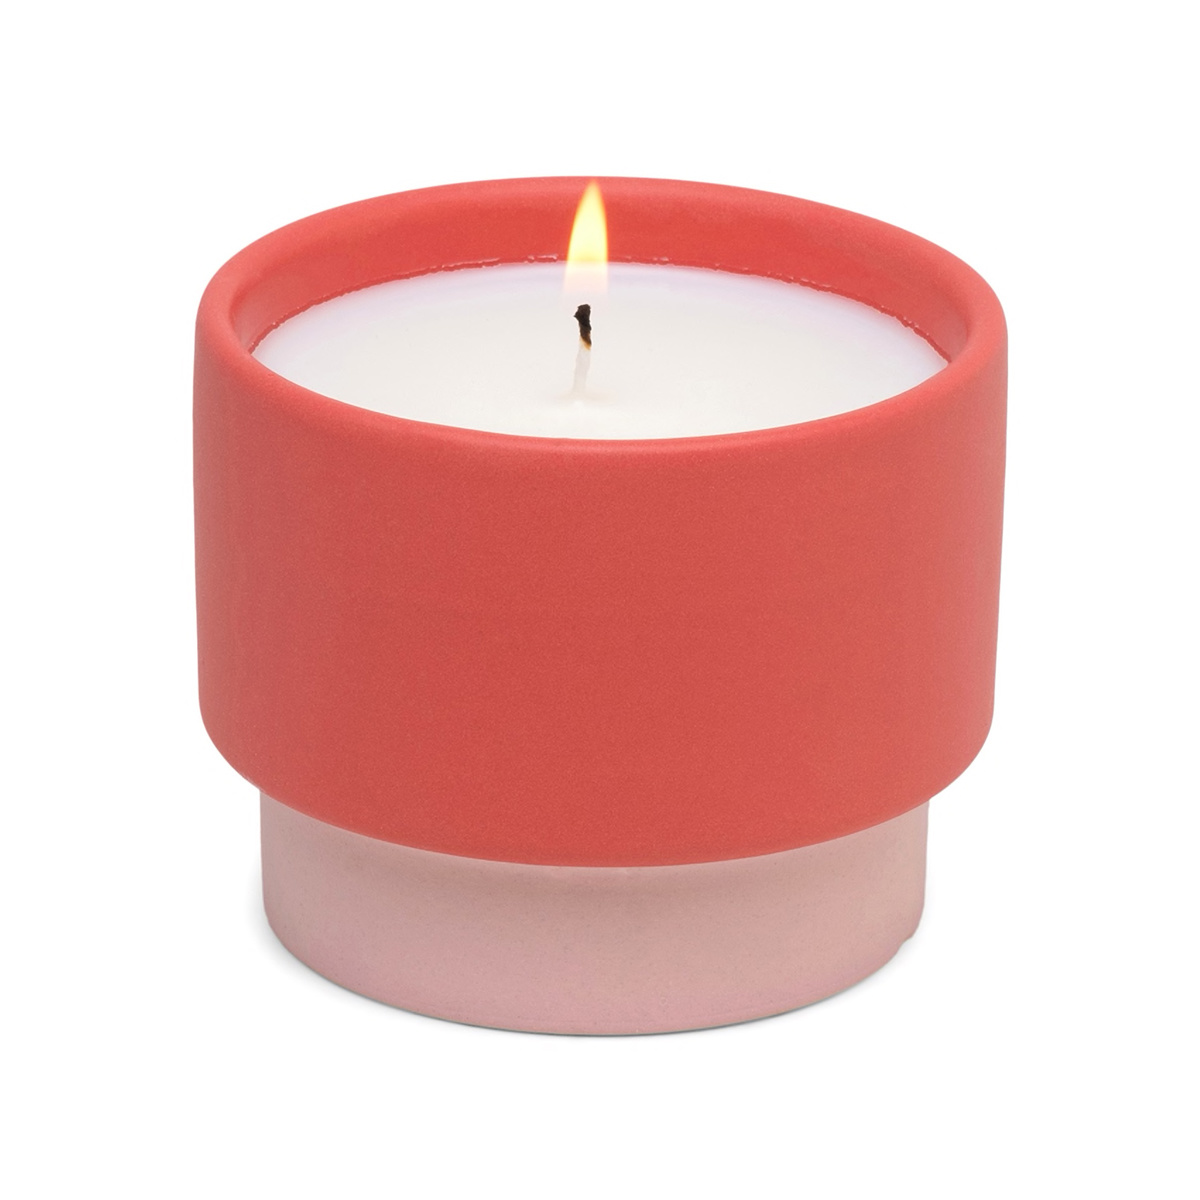 Paddywax - PA Sparkling Grapefruit Color Block Candle